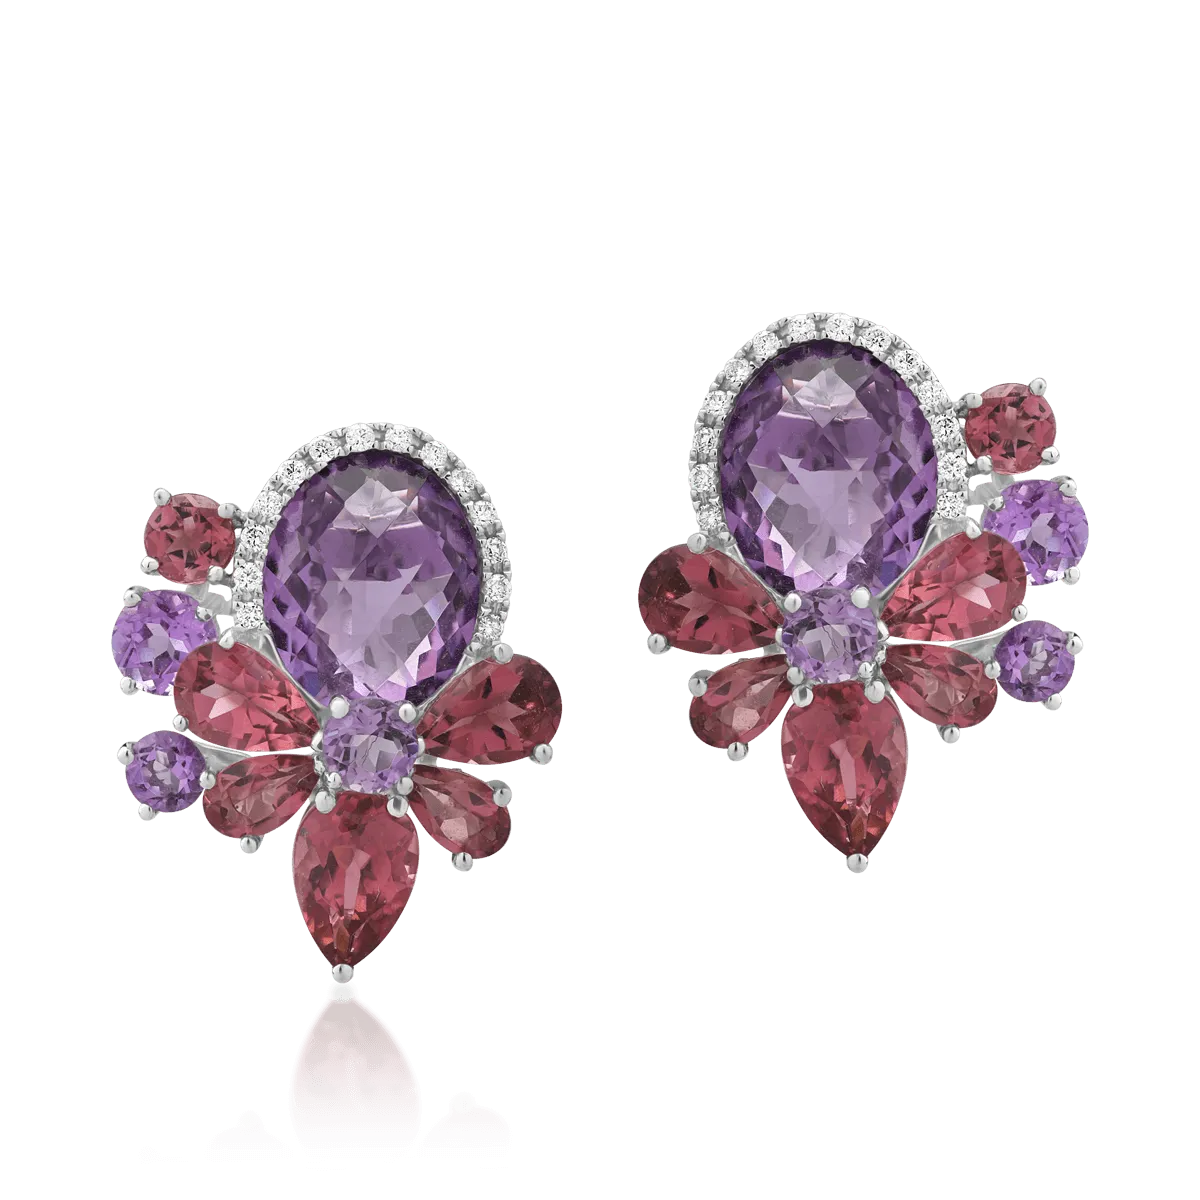 18K white gold earrings with 10.66ct precious and semiprecious stones